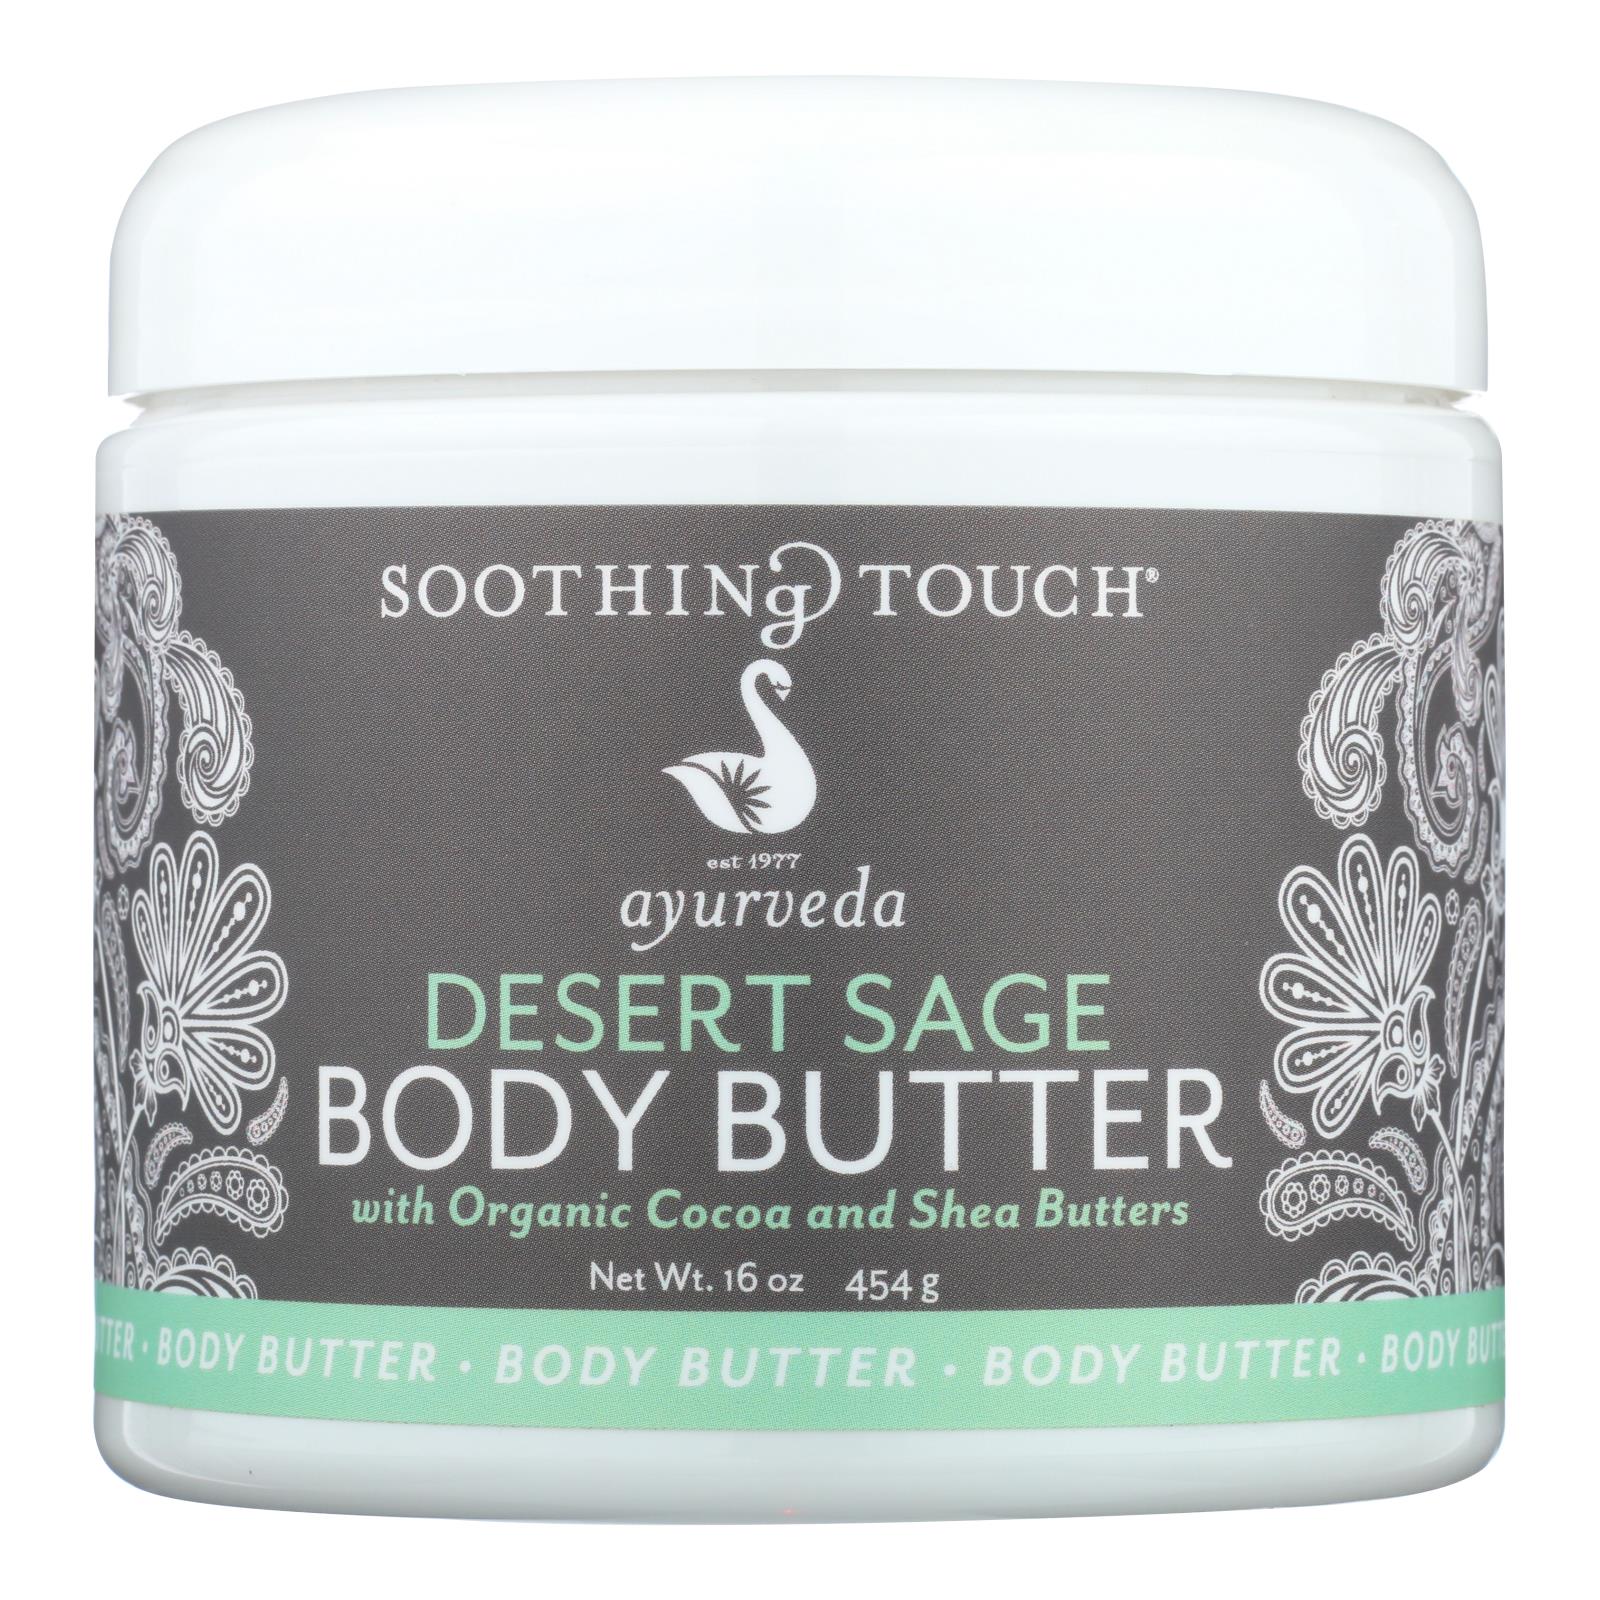 Soothing Touch - Body Butter Desert Sage - 1 Each-13 Oz